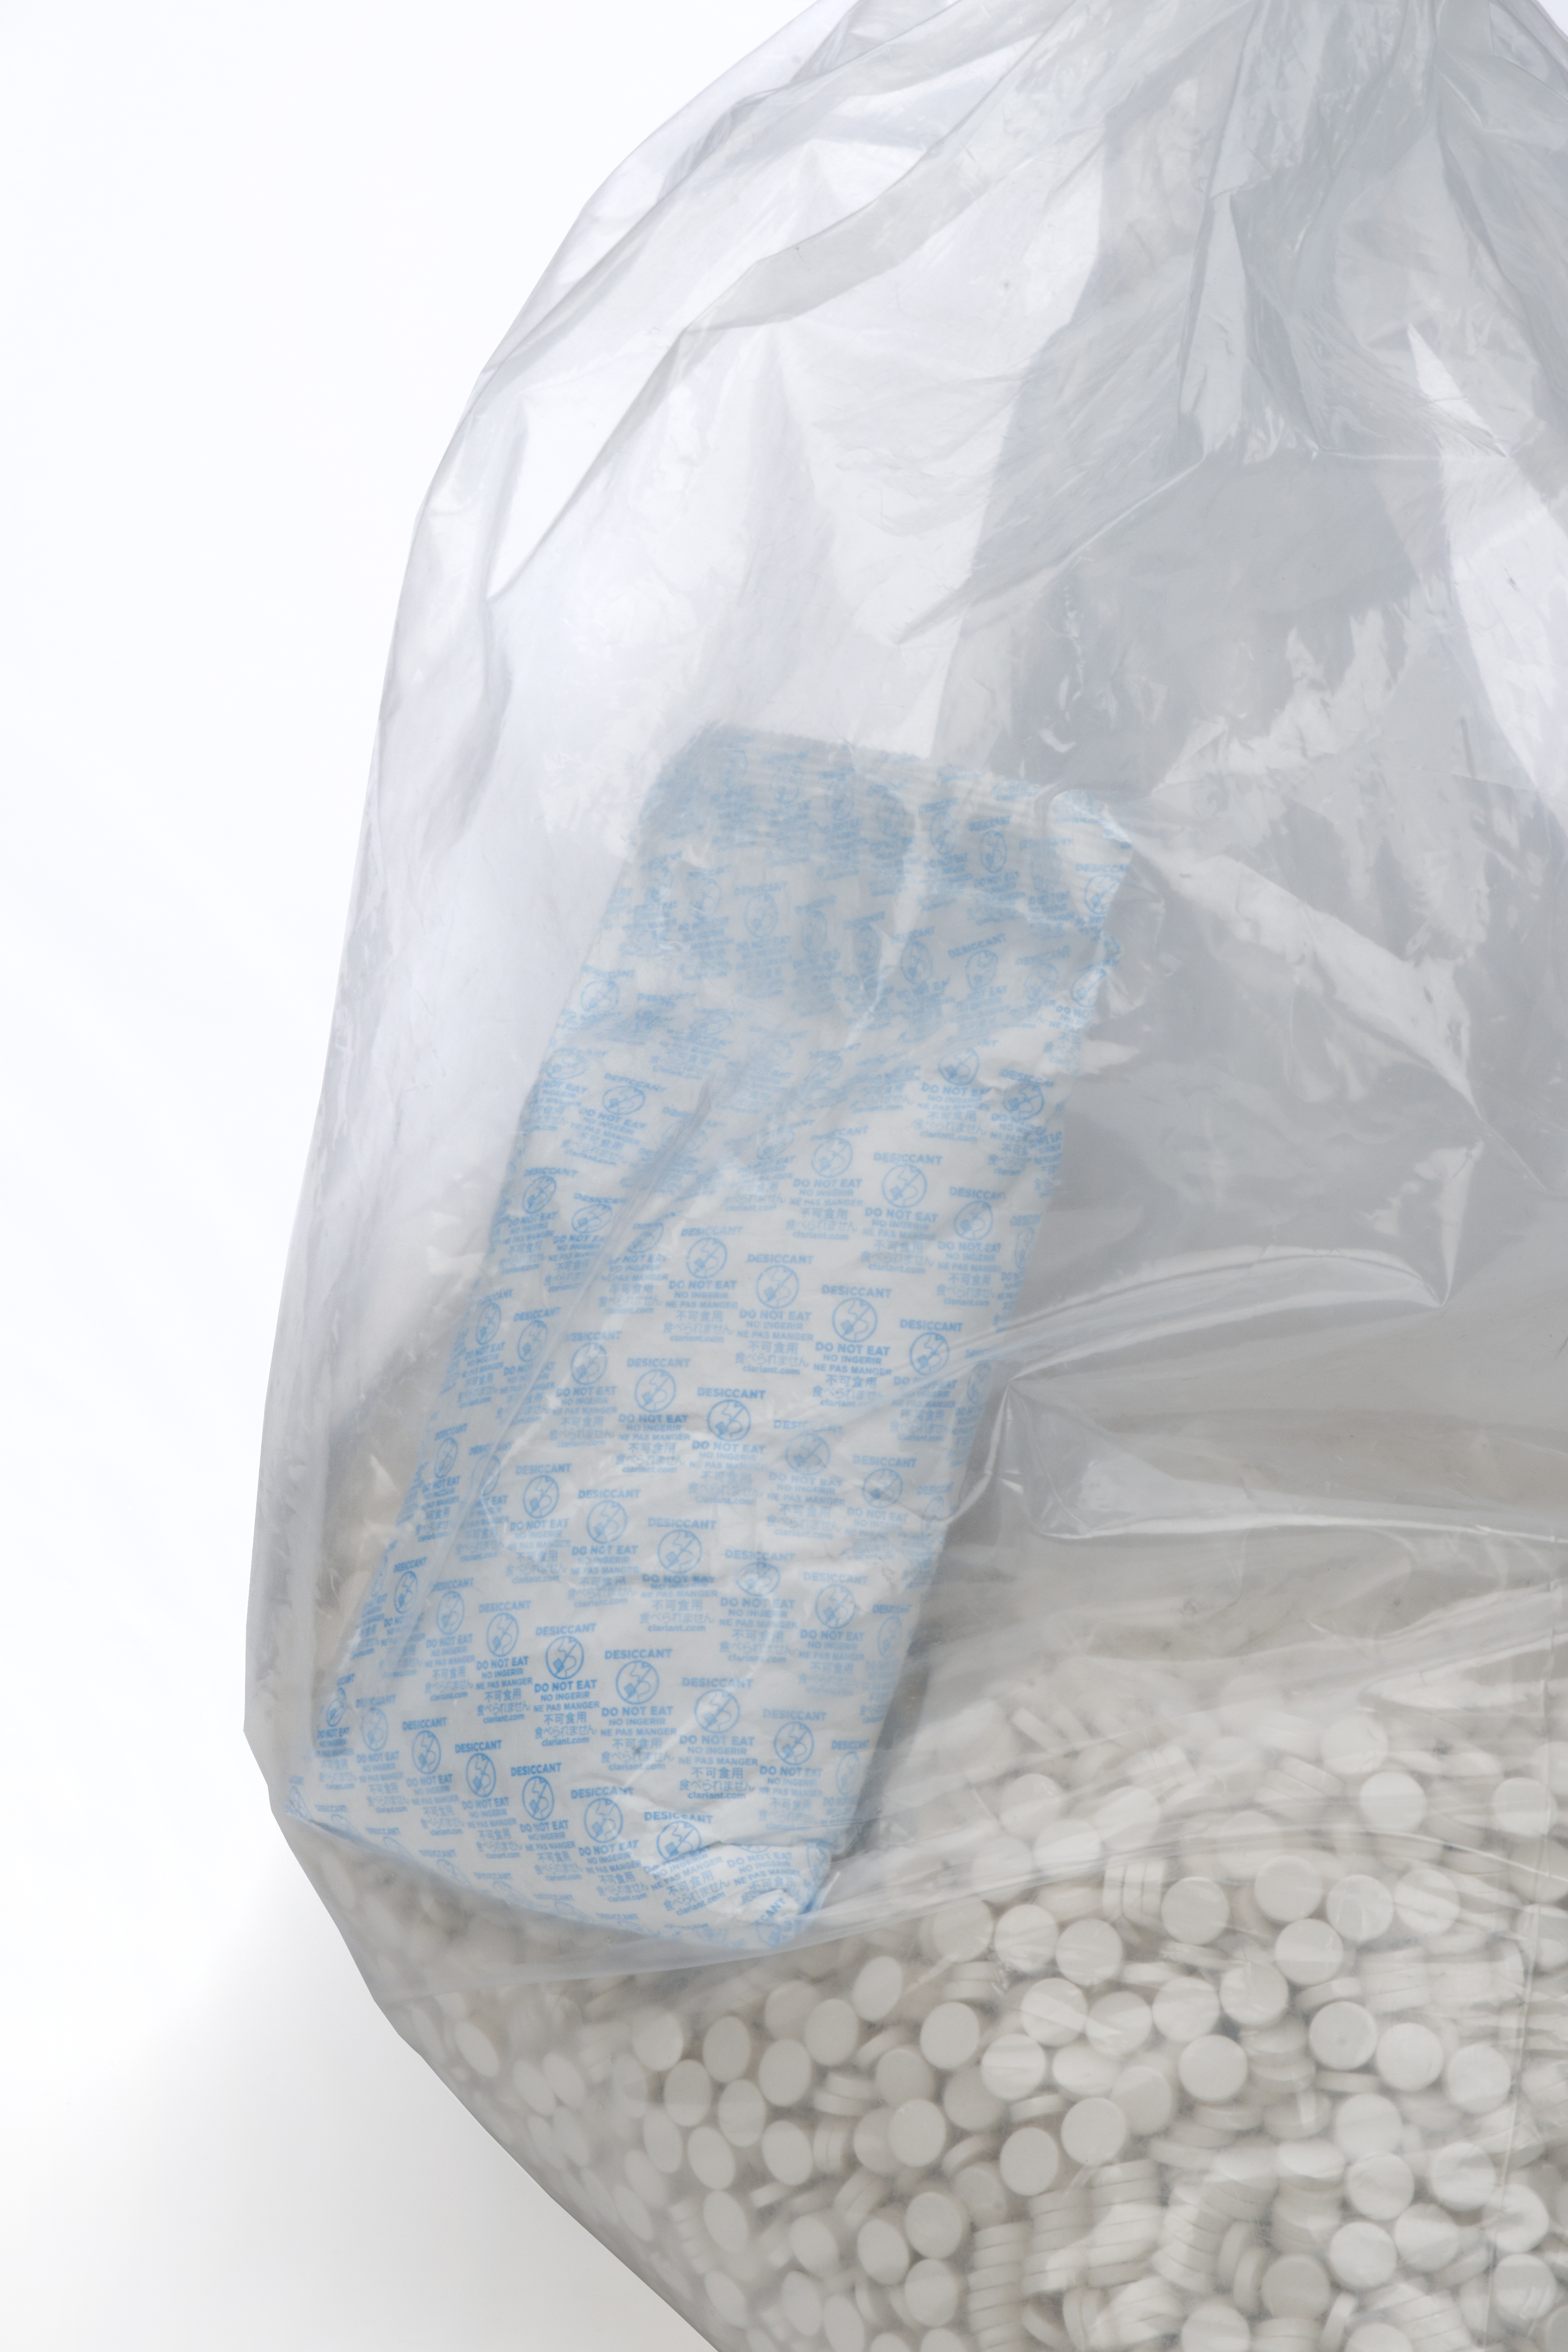 New Sorb-It® PHARMA desiccant bags from Clariant are produced in ISO 15378 GMP certified facilitie...